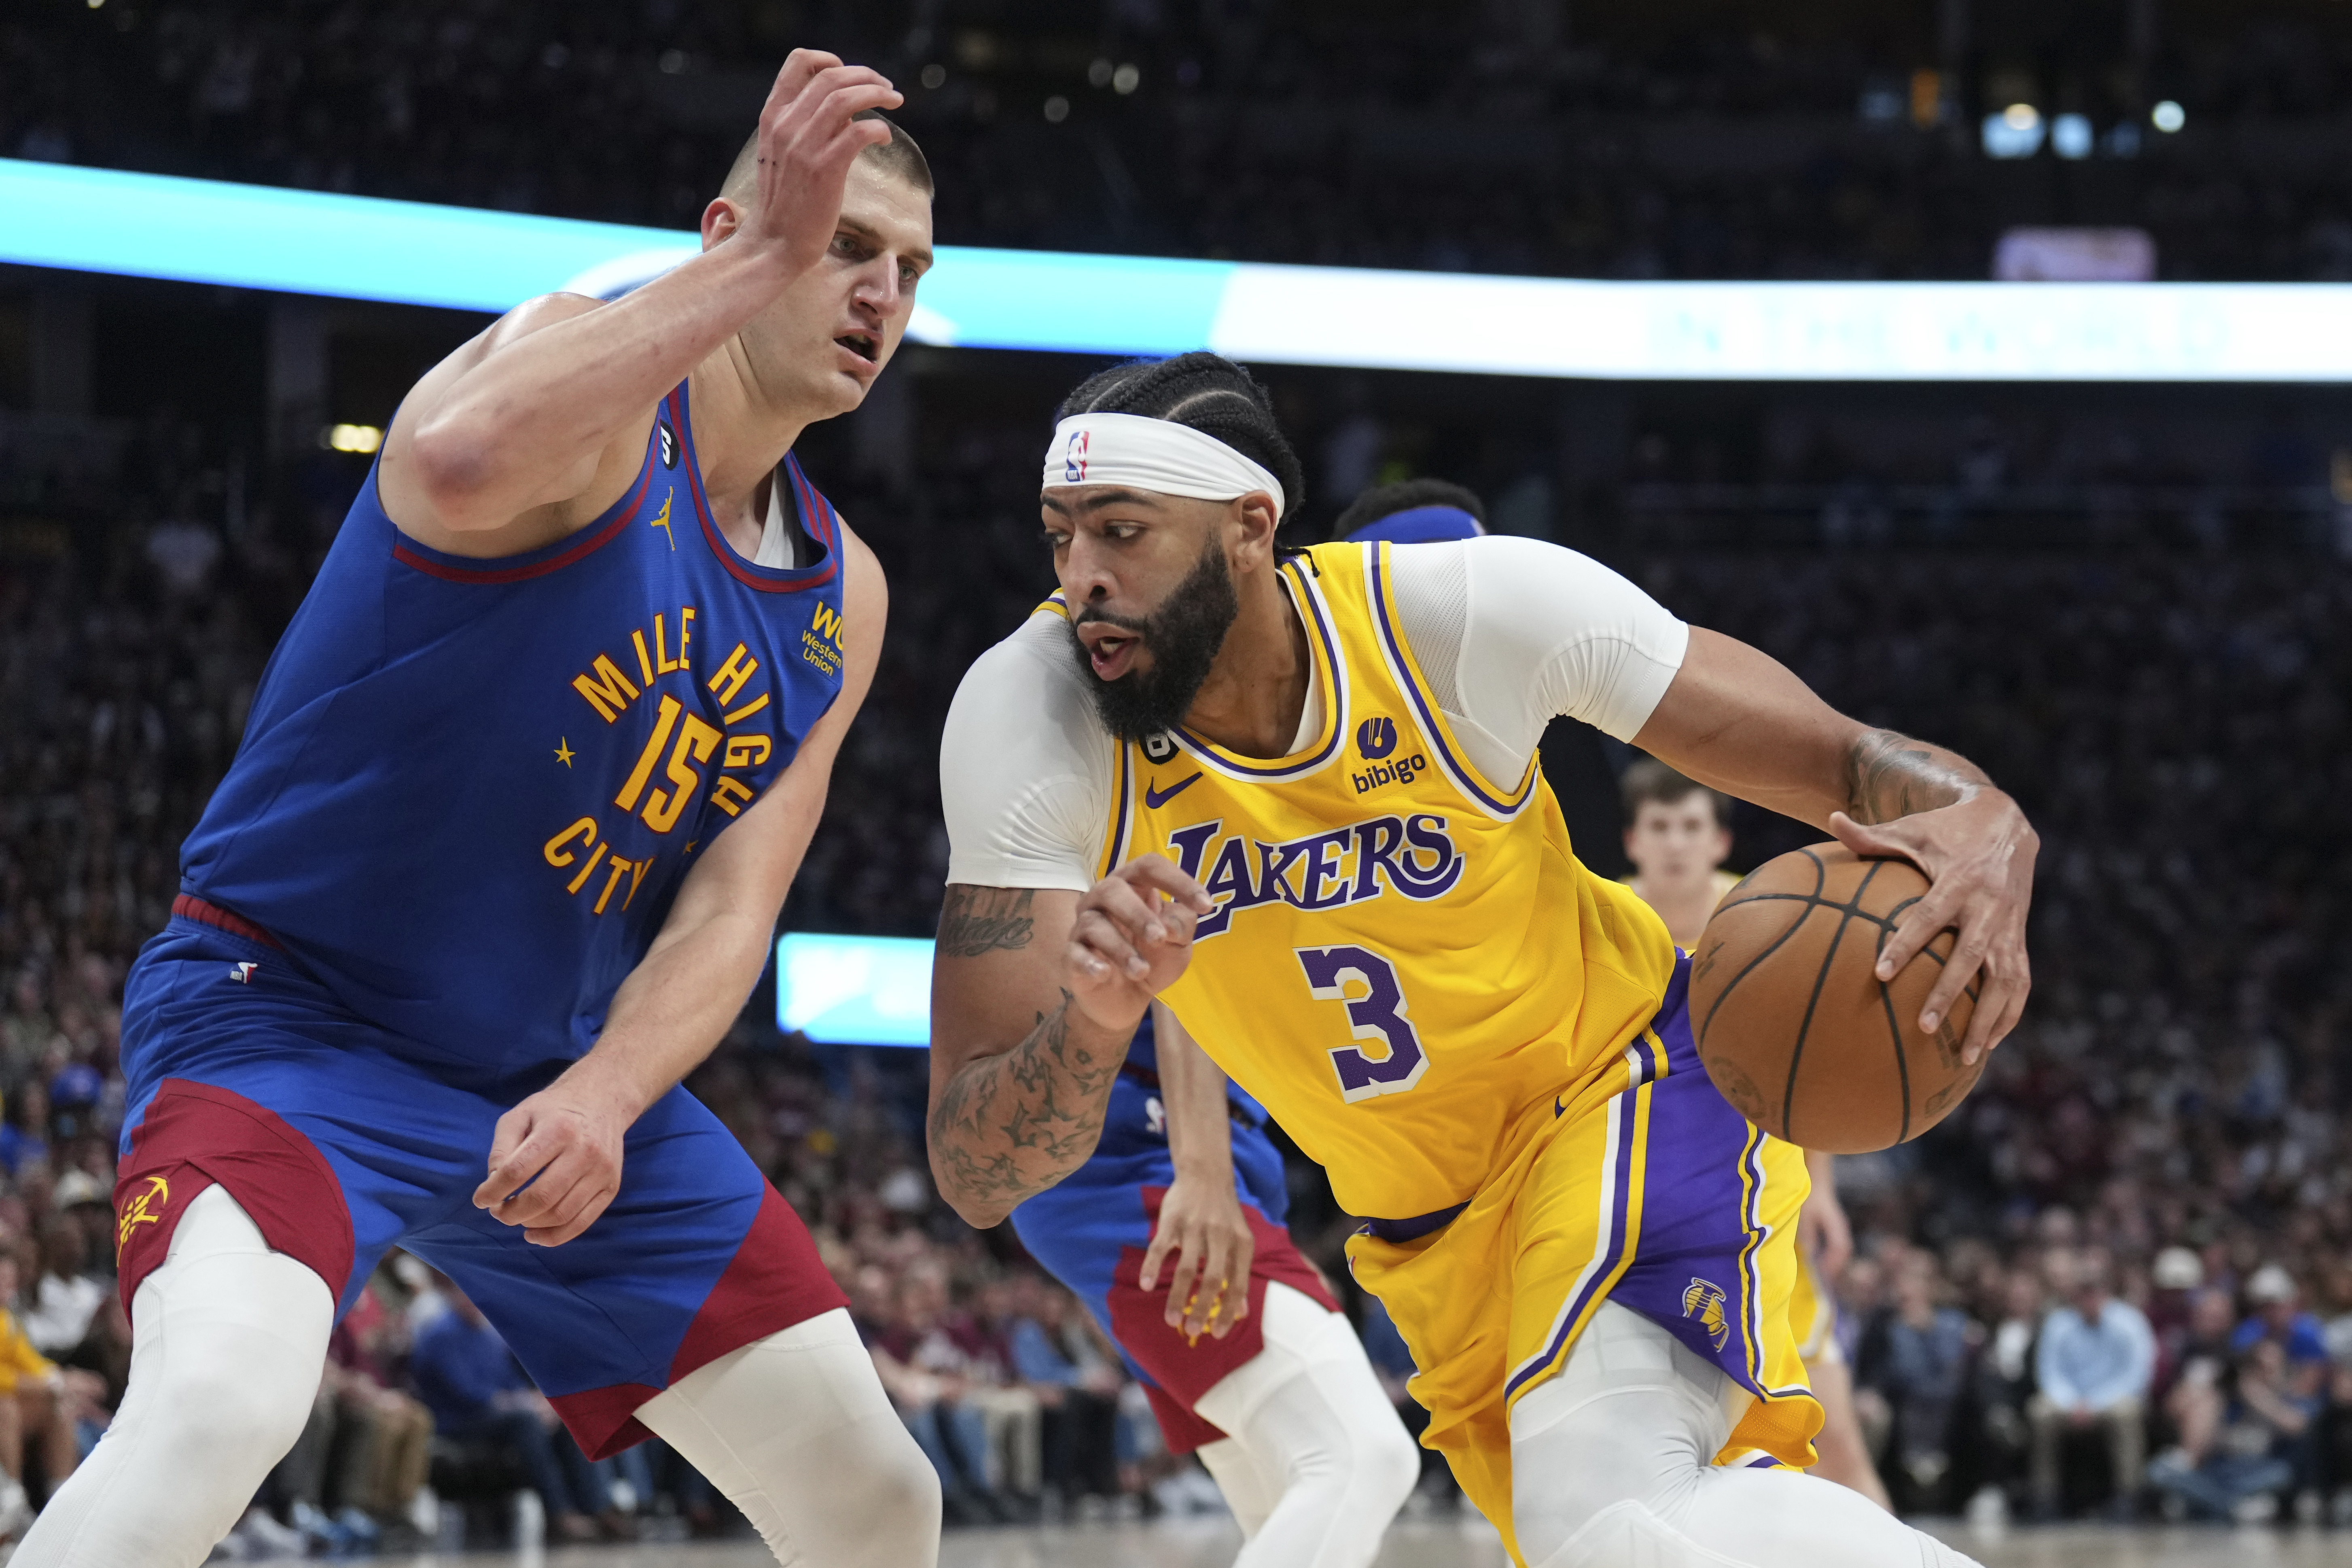 Jokic leads Nuggets past Lakers 132-126 in West opener